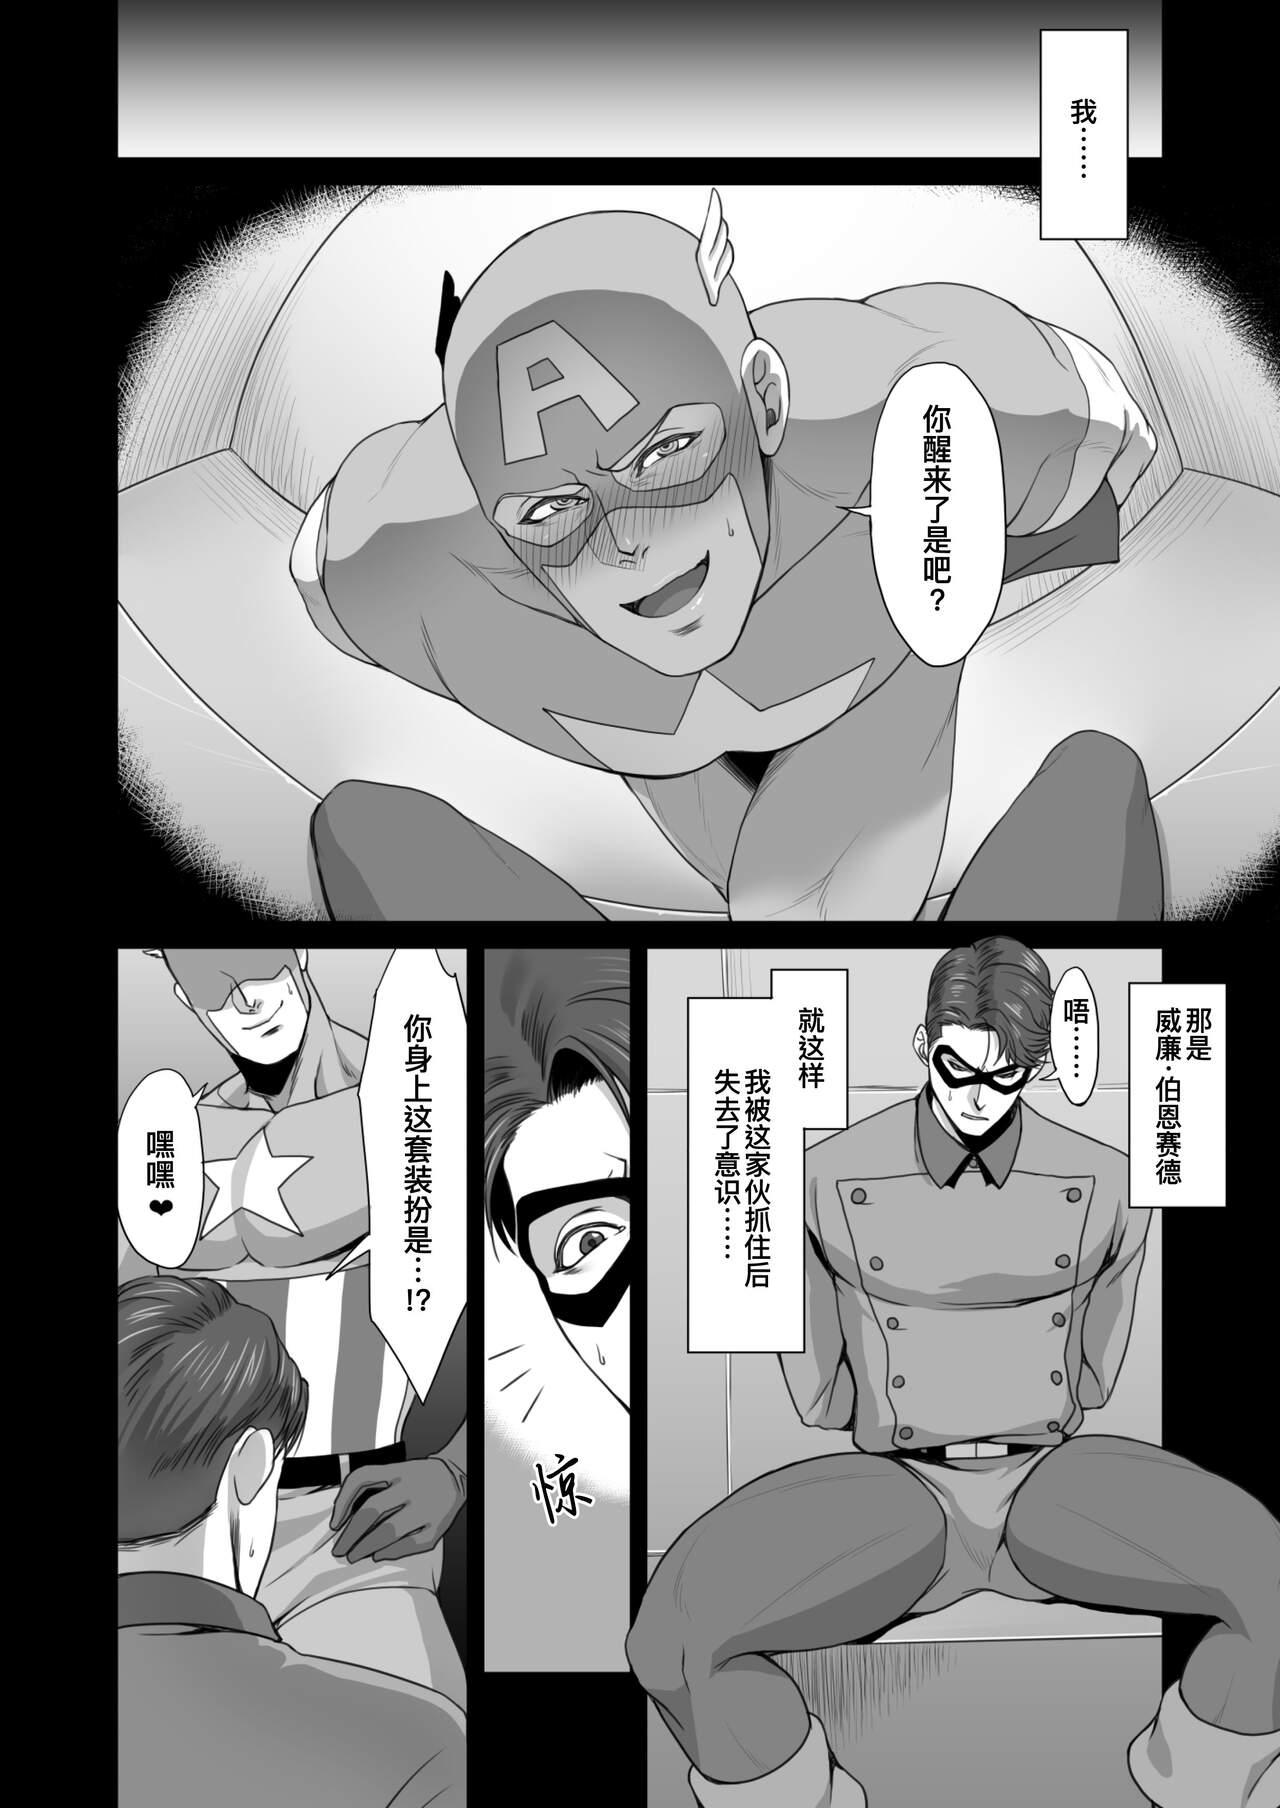 American NO HEROES Our love and hate relationship | 不再需要英雄 - 关于我们之间的爱恨情仇 - Avengers Fake Tits - Page 6